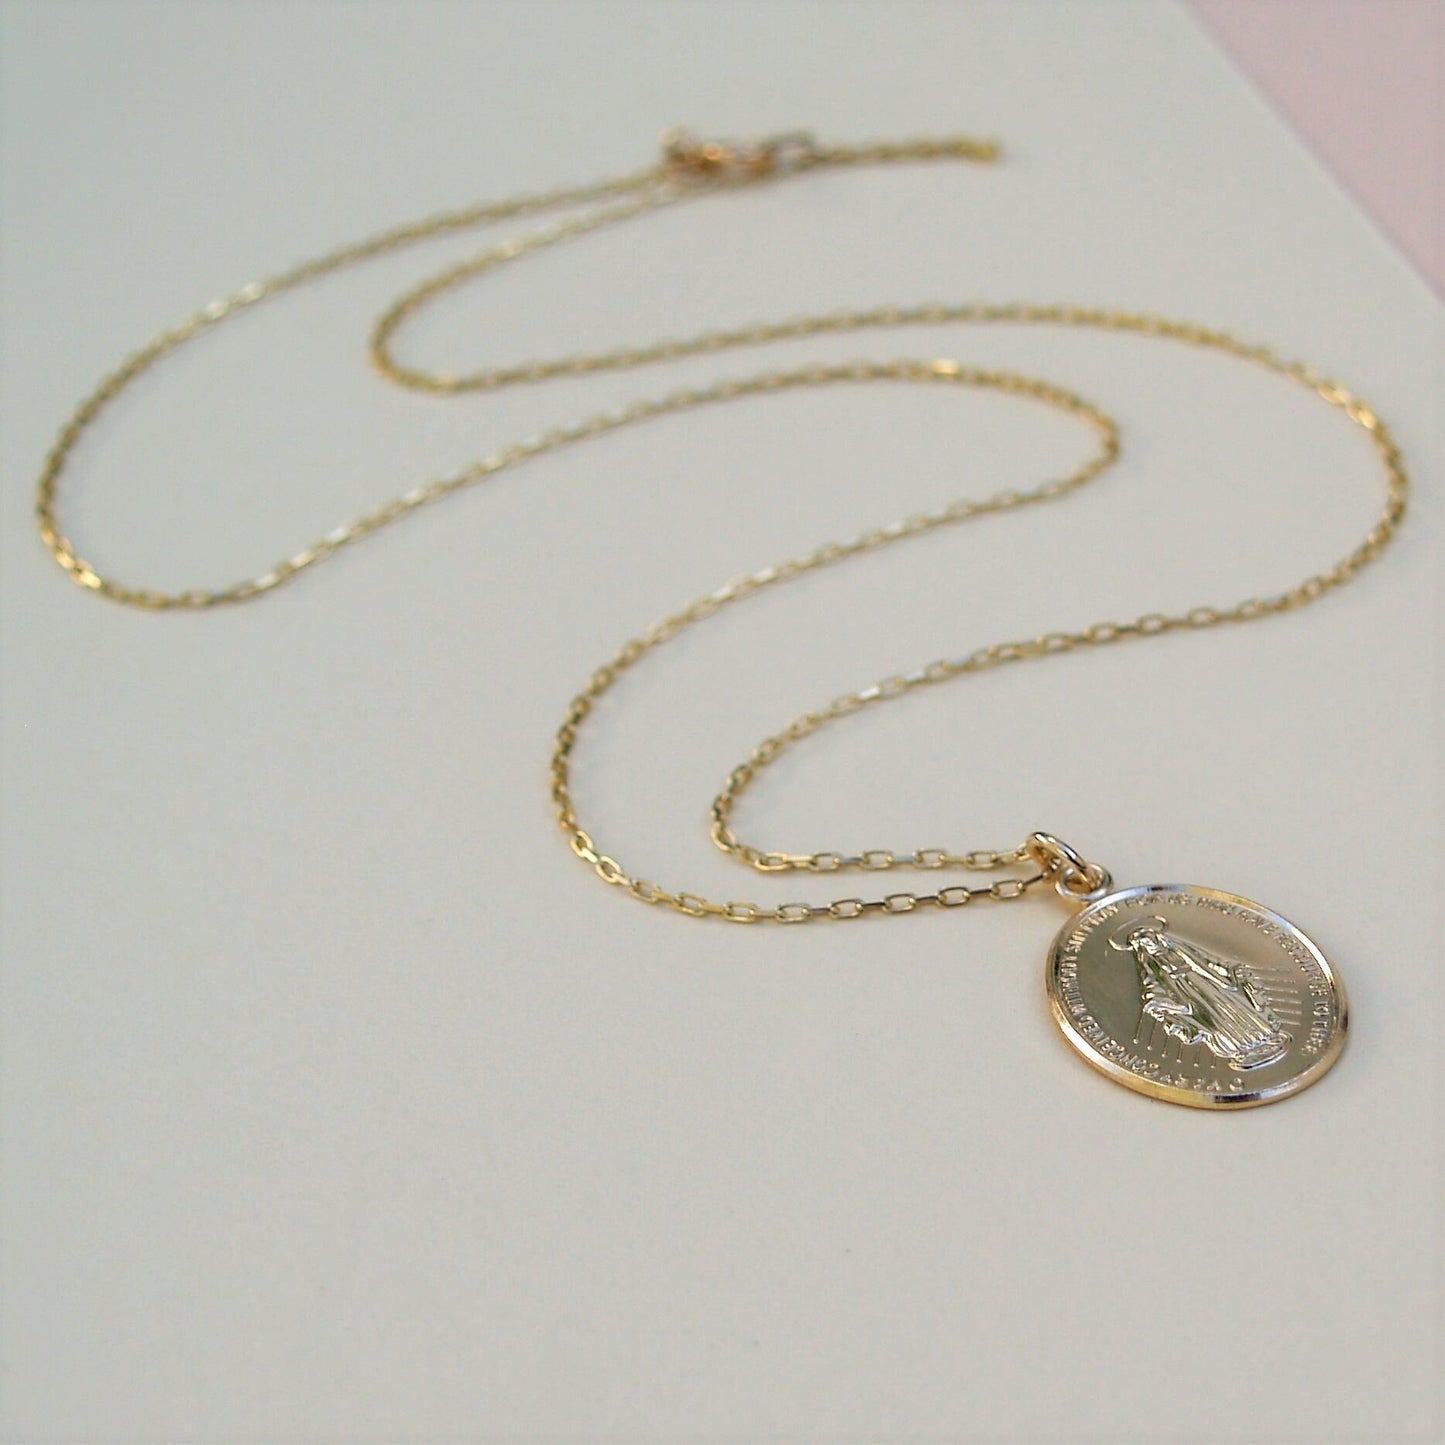 9ct solid yellow gold large size Miraculous Mary medal pendant on a 1.1mm wide diamond cut trace chain